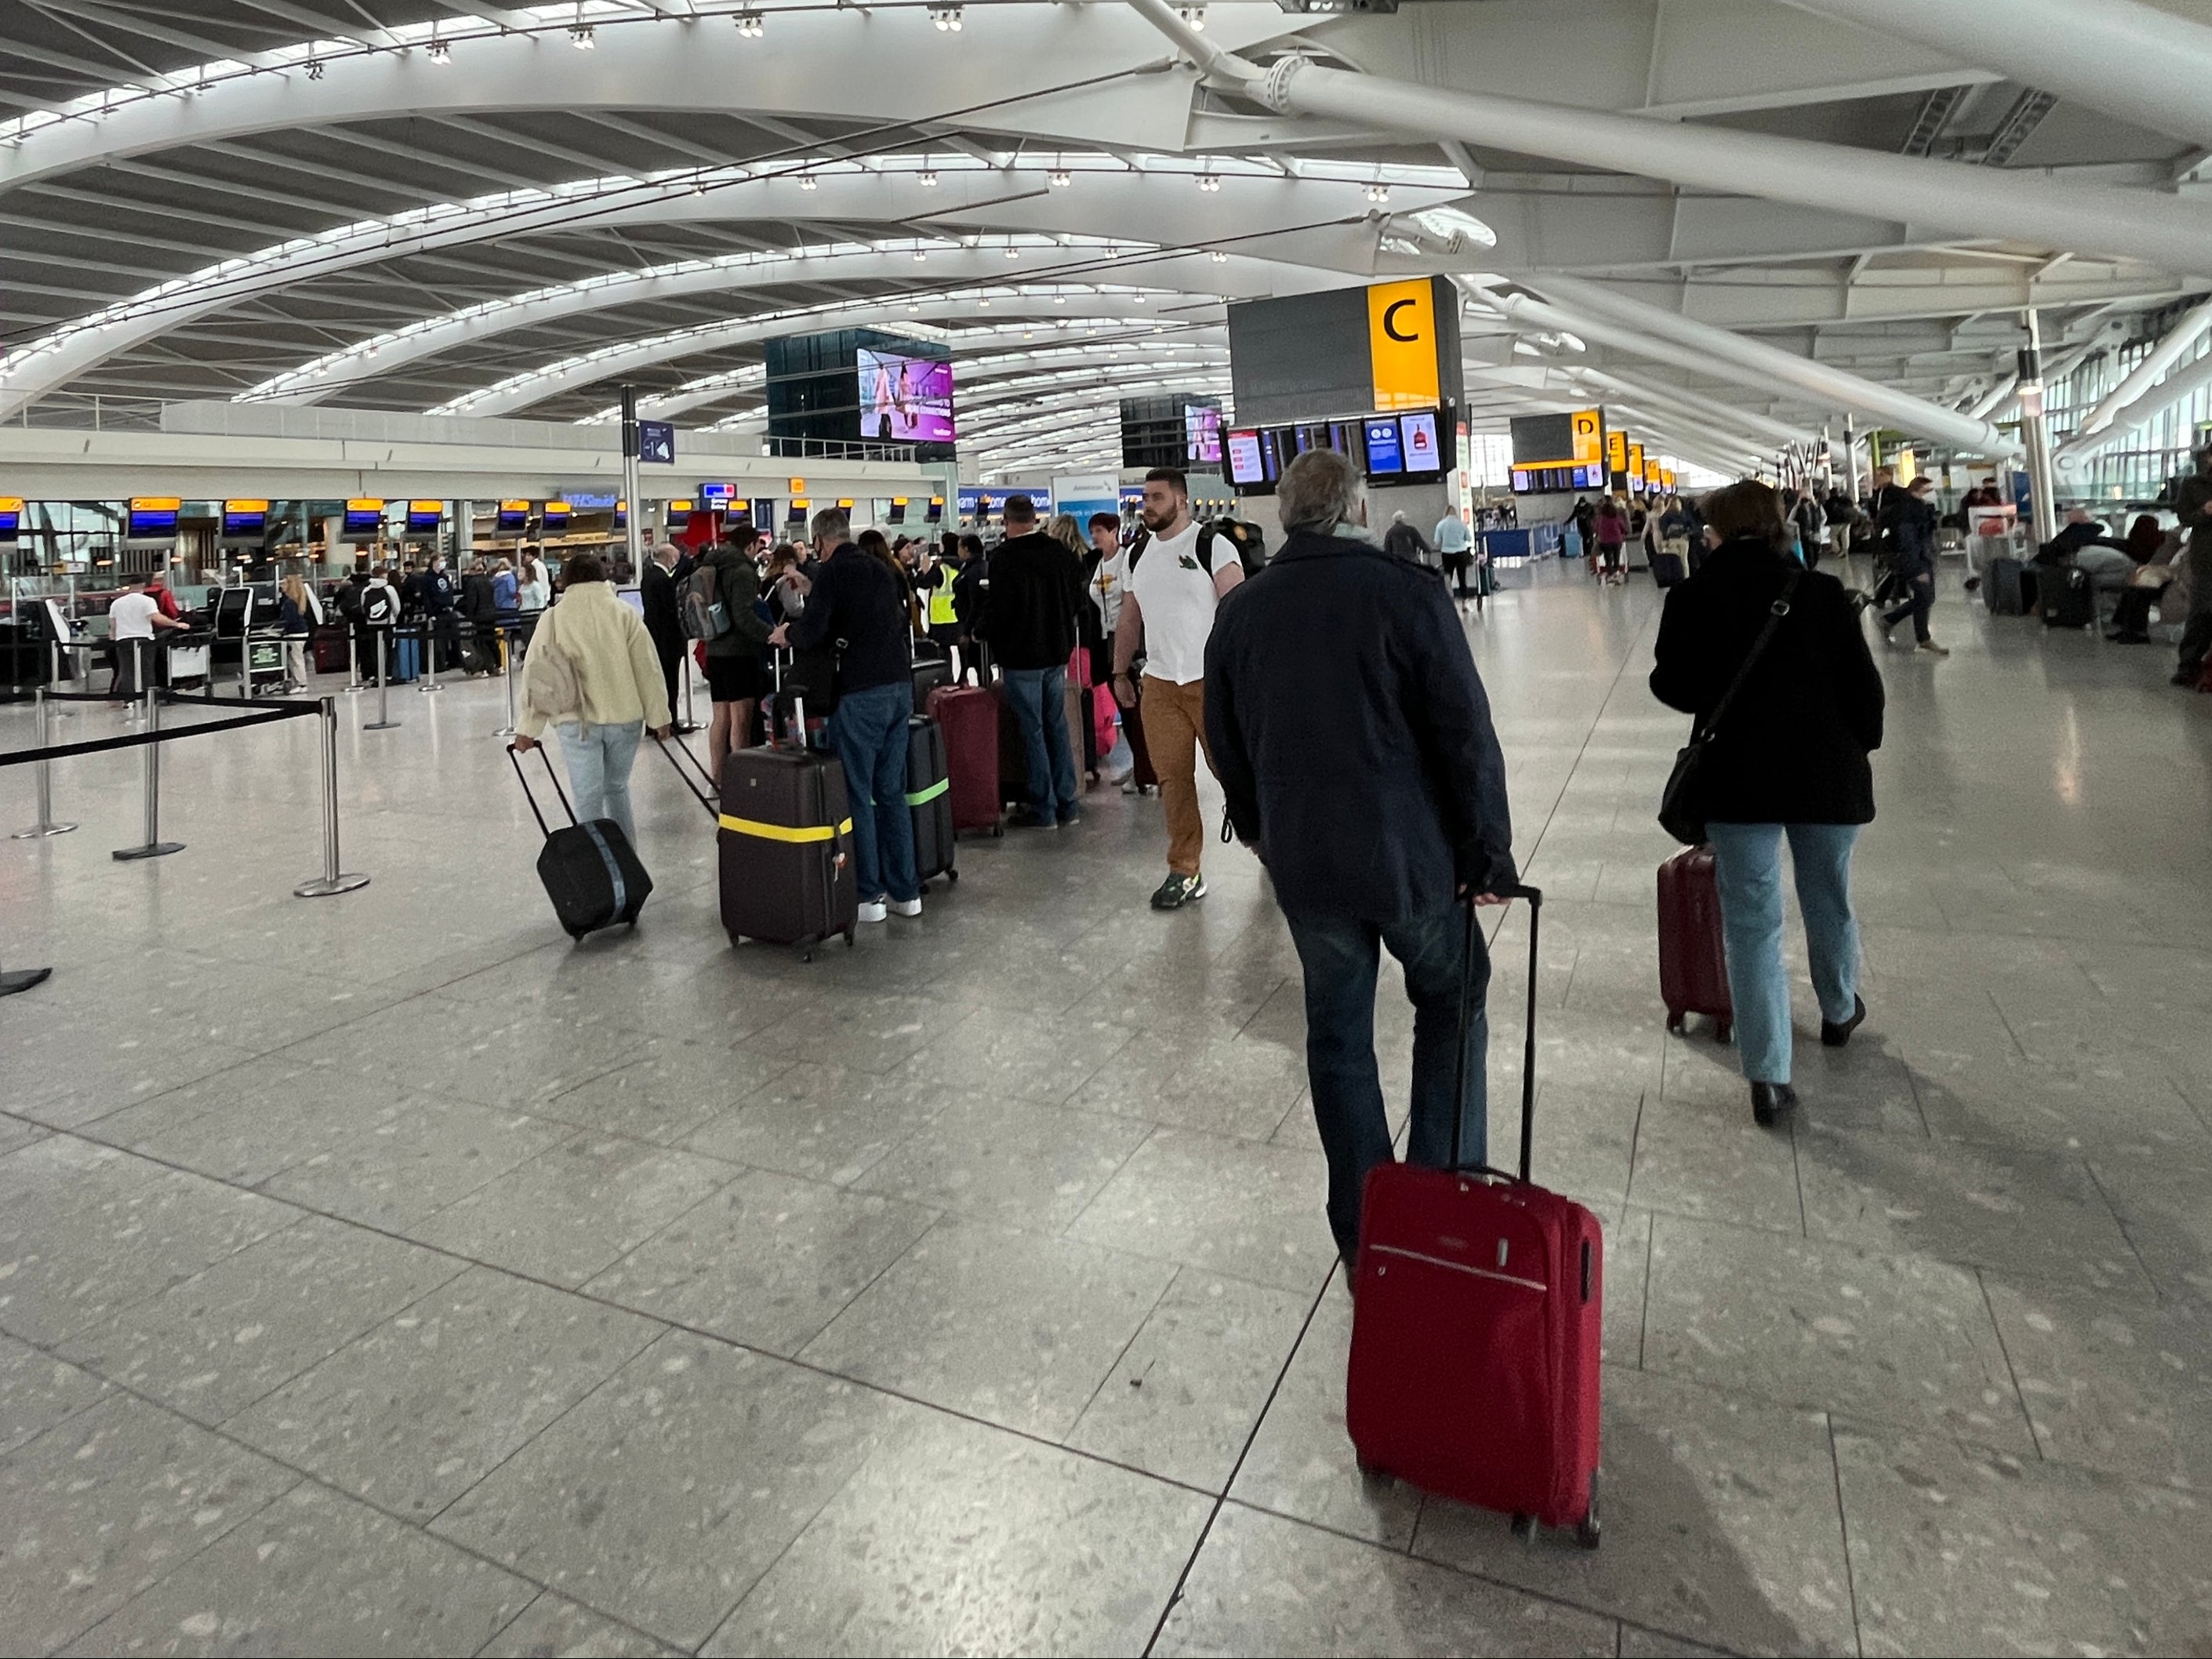 Going places: Terminal 5 at London Heathrow